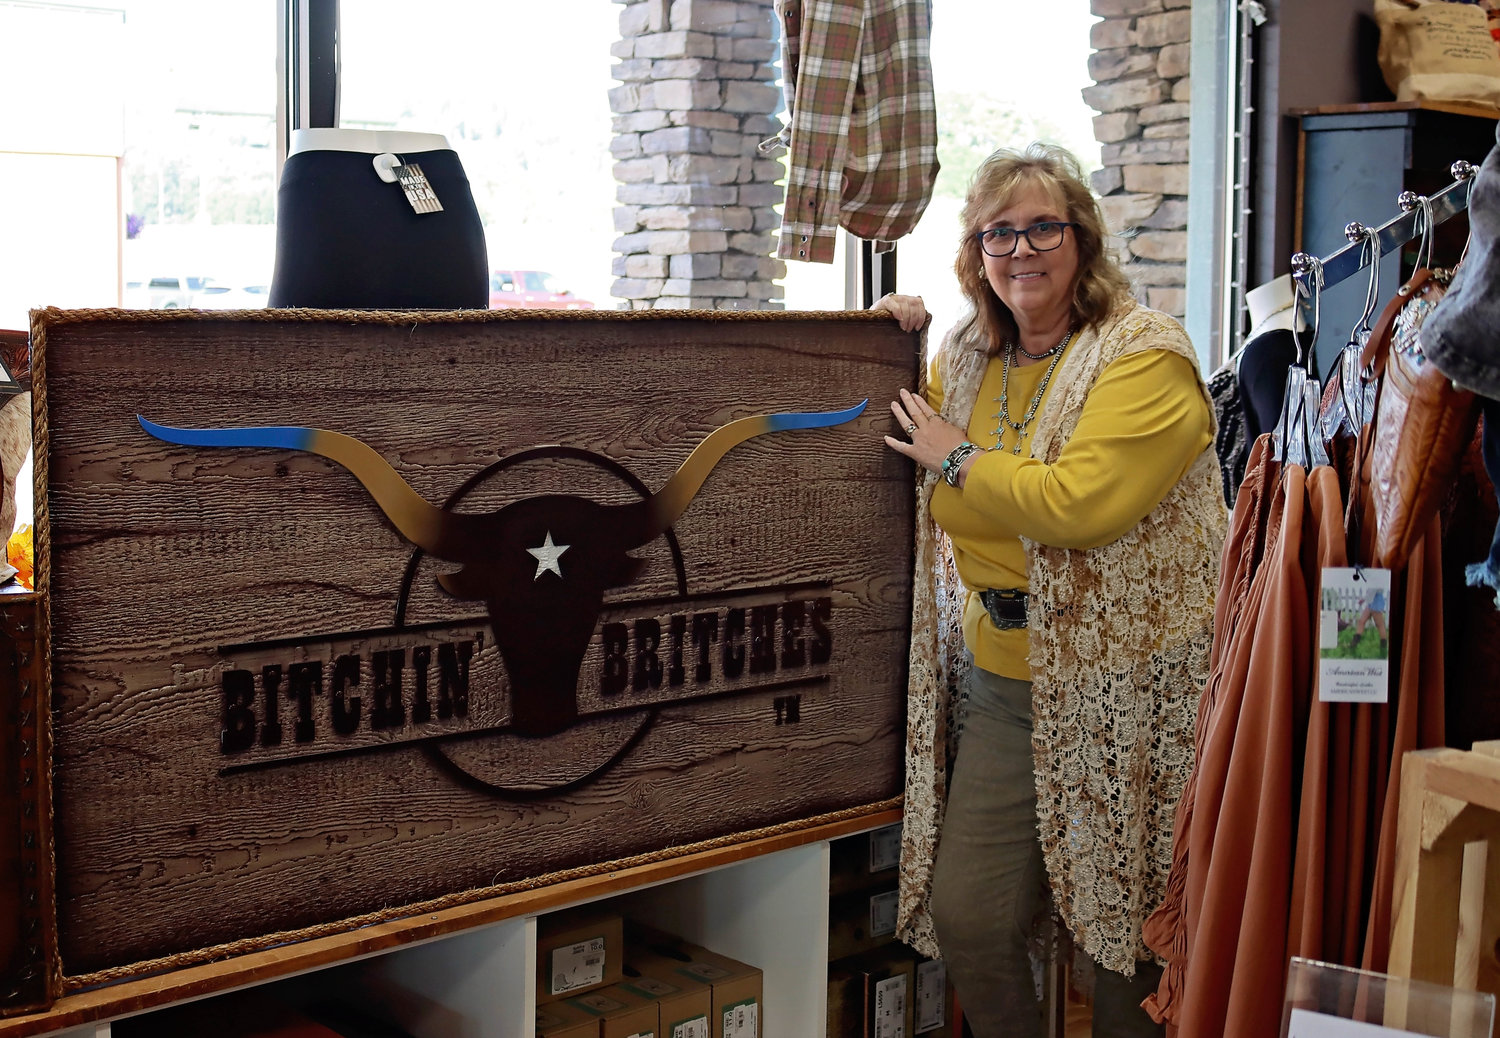 The Centralia-Chehalis Chamber of Commerce will hold a ribbon-cutting ceremony for Bitchin’ Britches Boutique — formally Sparkles N’ Spurs Boutique — at 2 p.m. Saturday, Oct. 22.